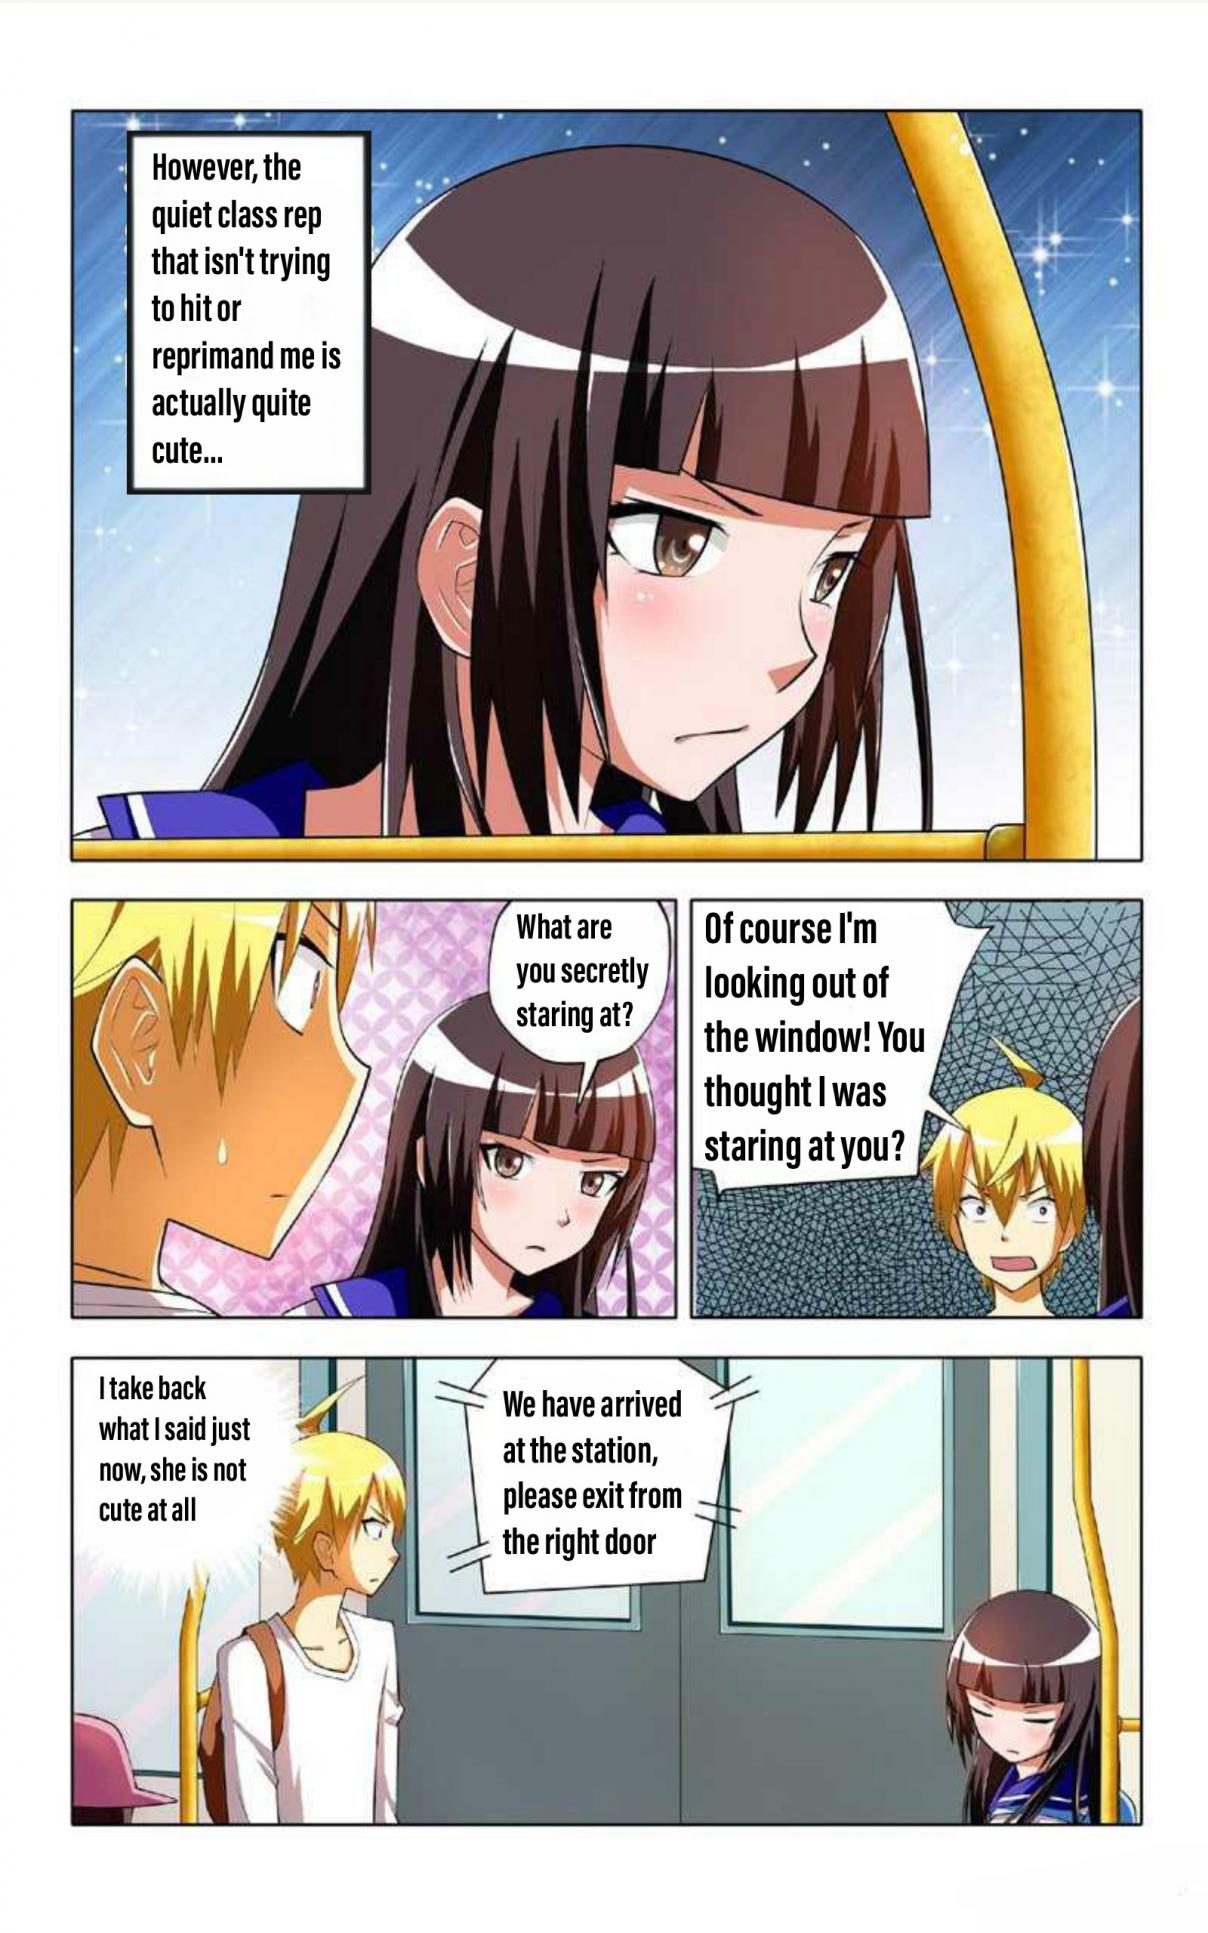 I Don't Want to Be Bullied By Girls Ch. 6 The Persecuted Manga Heroine